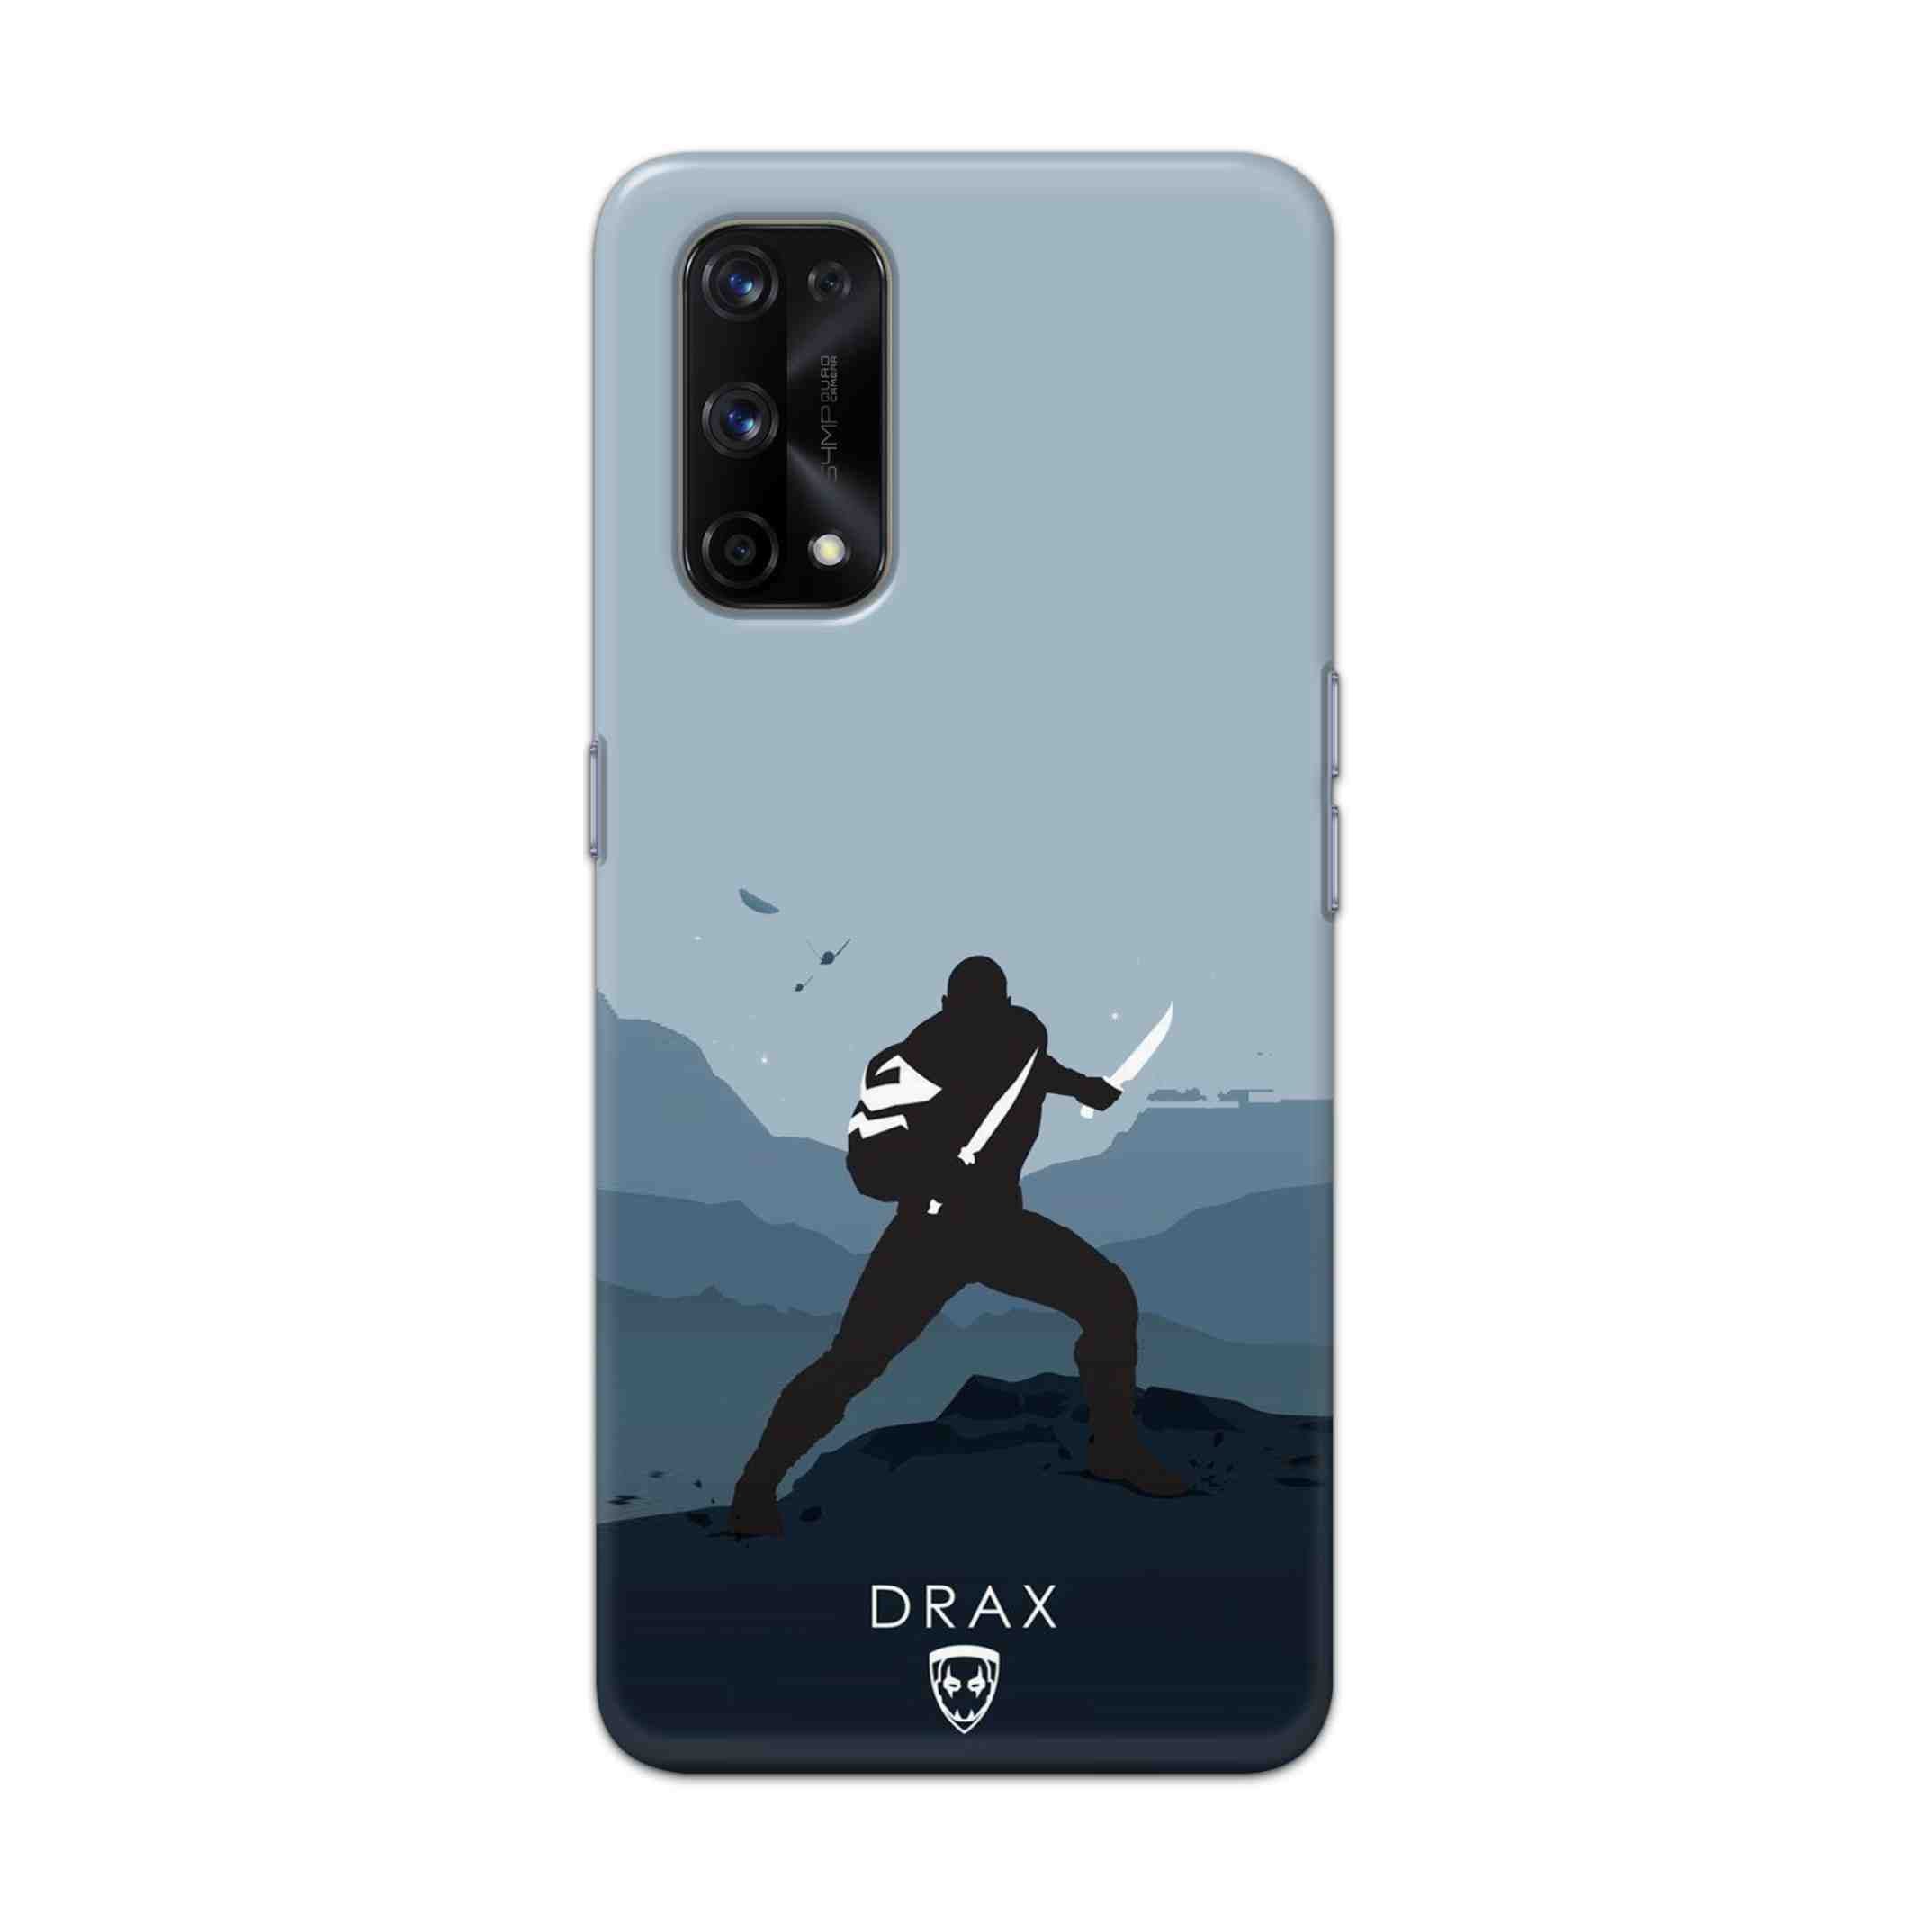 Buy Drax Hard Back Mobile Phone Case Cover For Realme X7 Pro Online